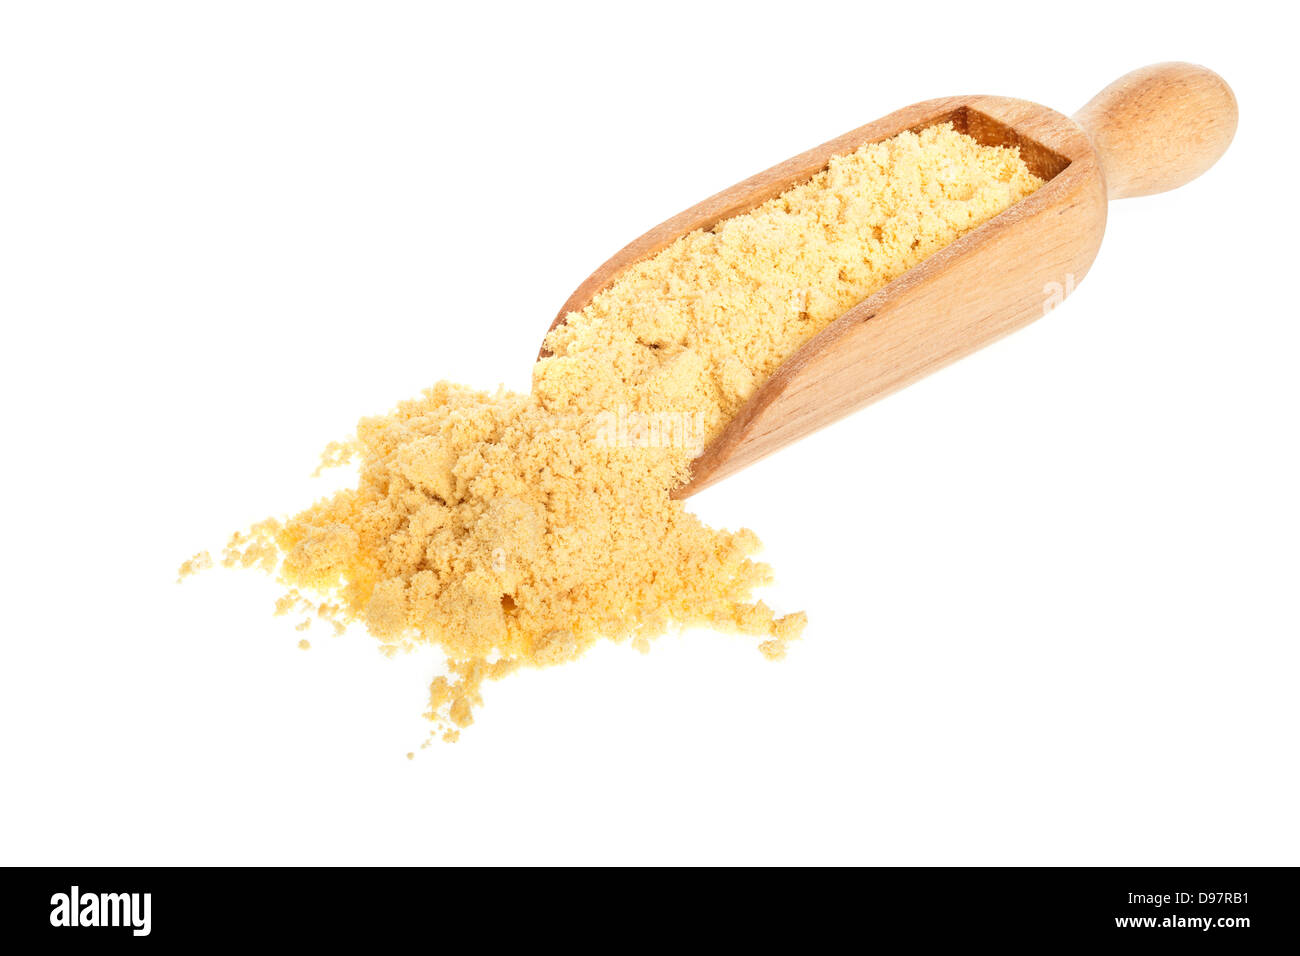 Mustard Powder - Yellow English mustard powder spilling from a scoop on a white background, front to back focus. Stock Photo